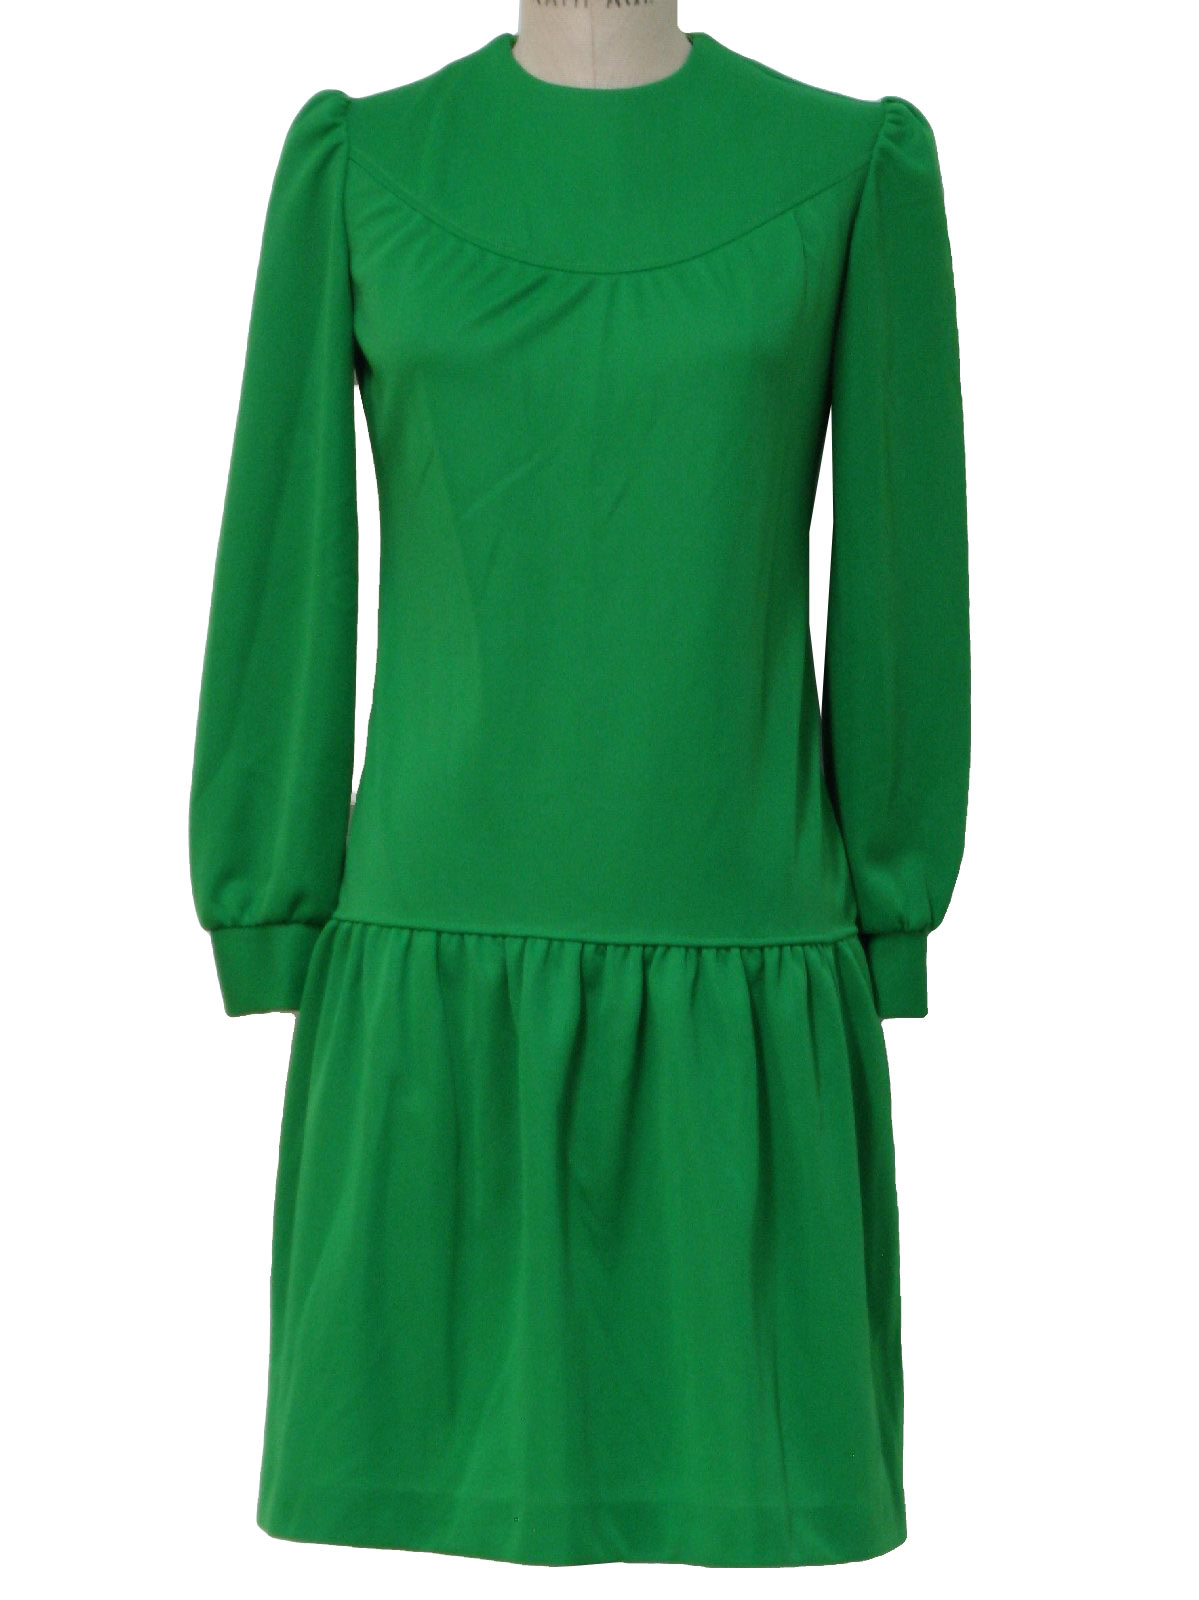 Vintage 1970's Dress: 70s -Union label- Womens grass green polyester ...